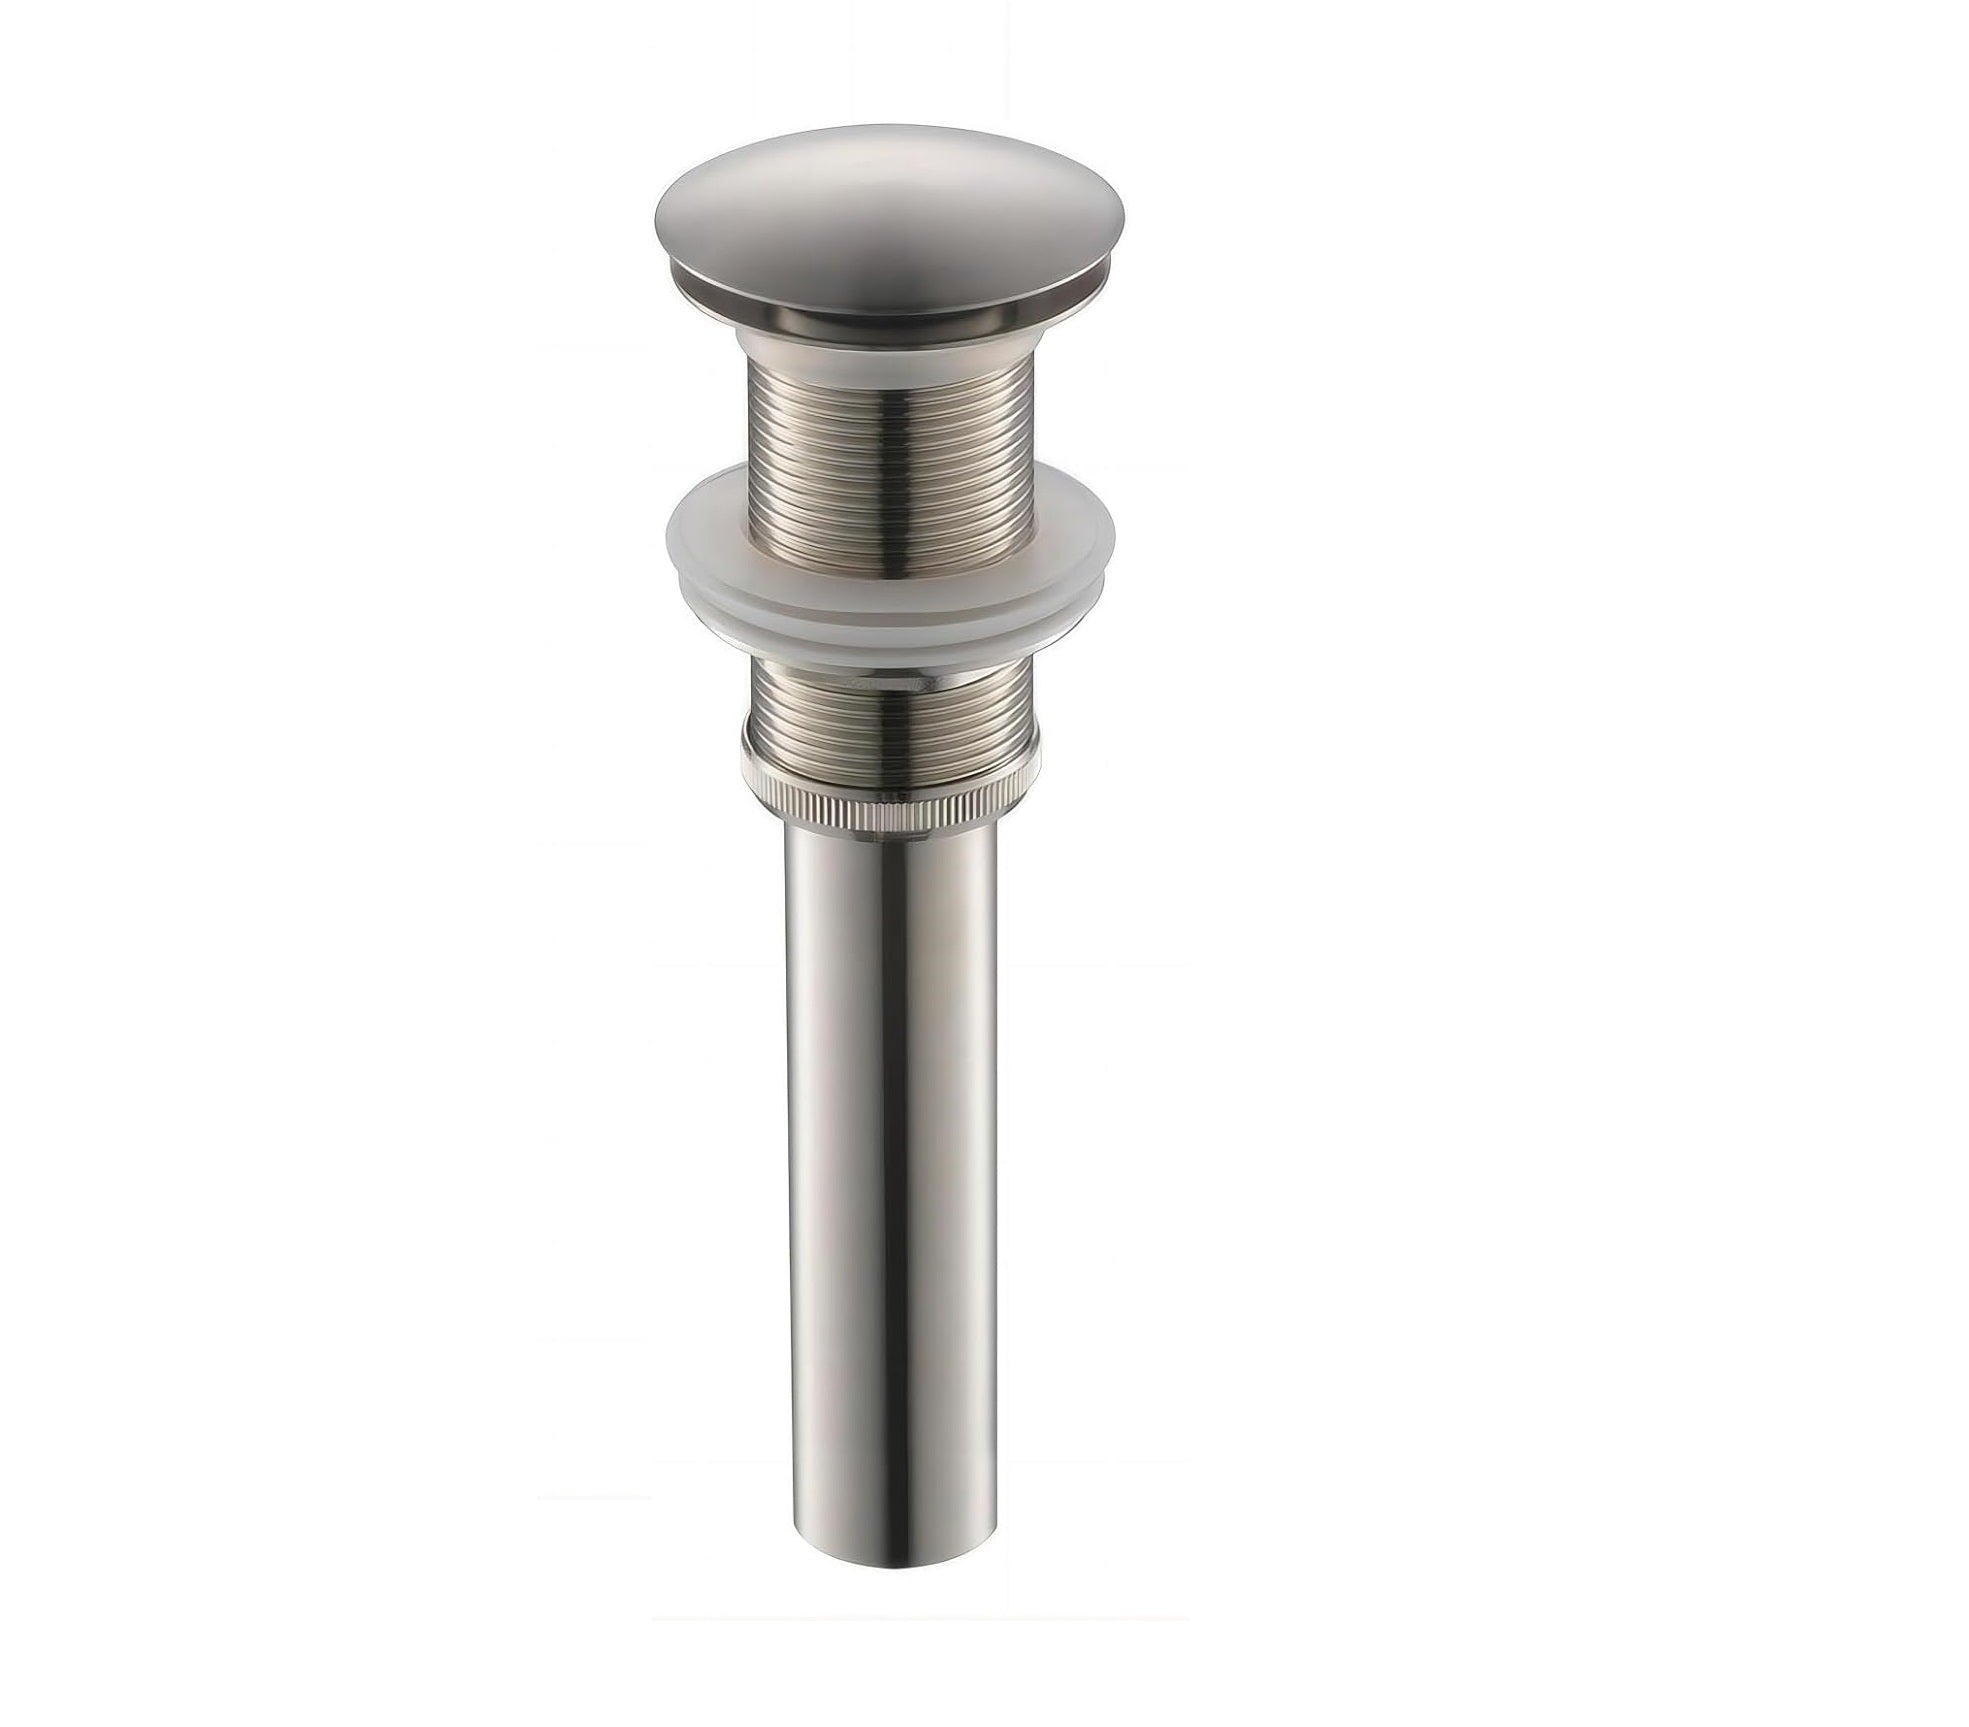 InArt Faucet Bathroom Sink Drain Stopper Pop up Drain Without Overflow for Vessel Sink Lavatory Vanity,Brushed Nickel - InArt-Studio-USA